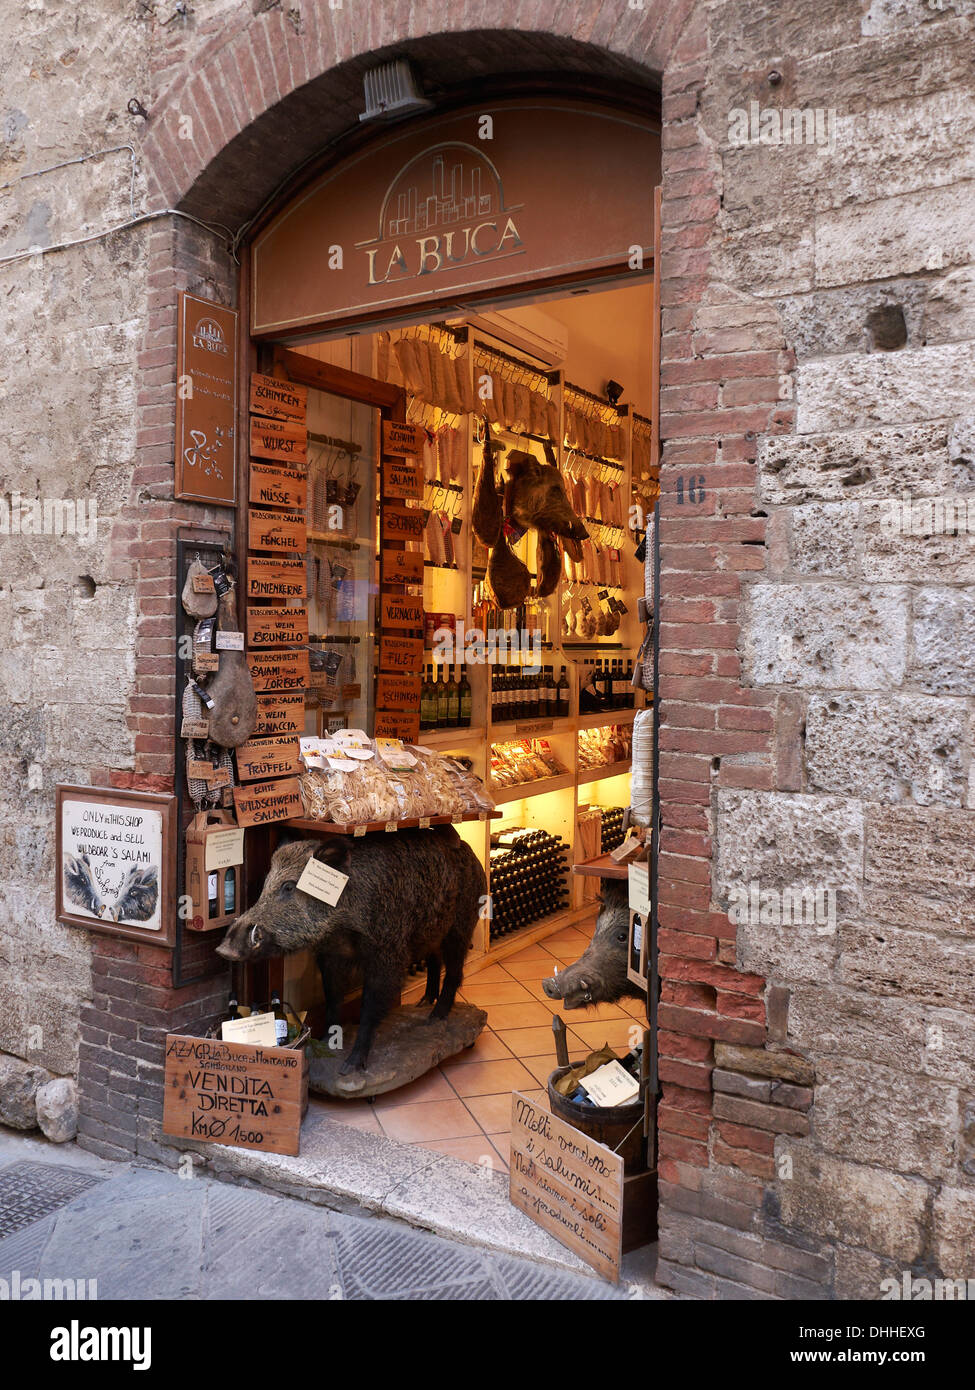 A Shop selling local specialities in San GimignanoTuscany Italy including wines cheeses and local meats. Decorated with a stuffed wild boar Stock Photo